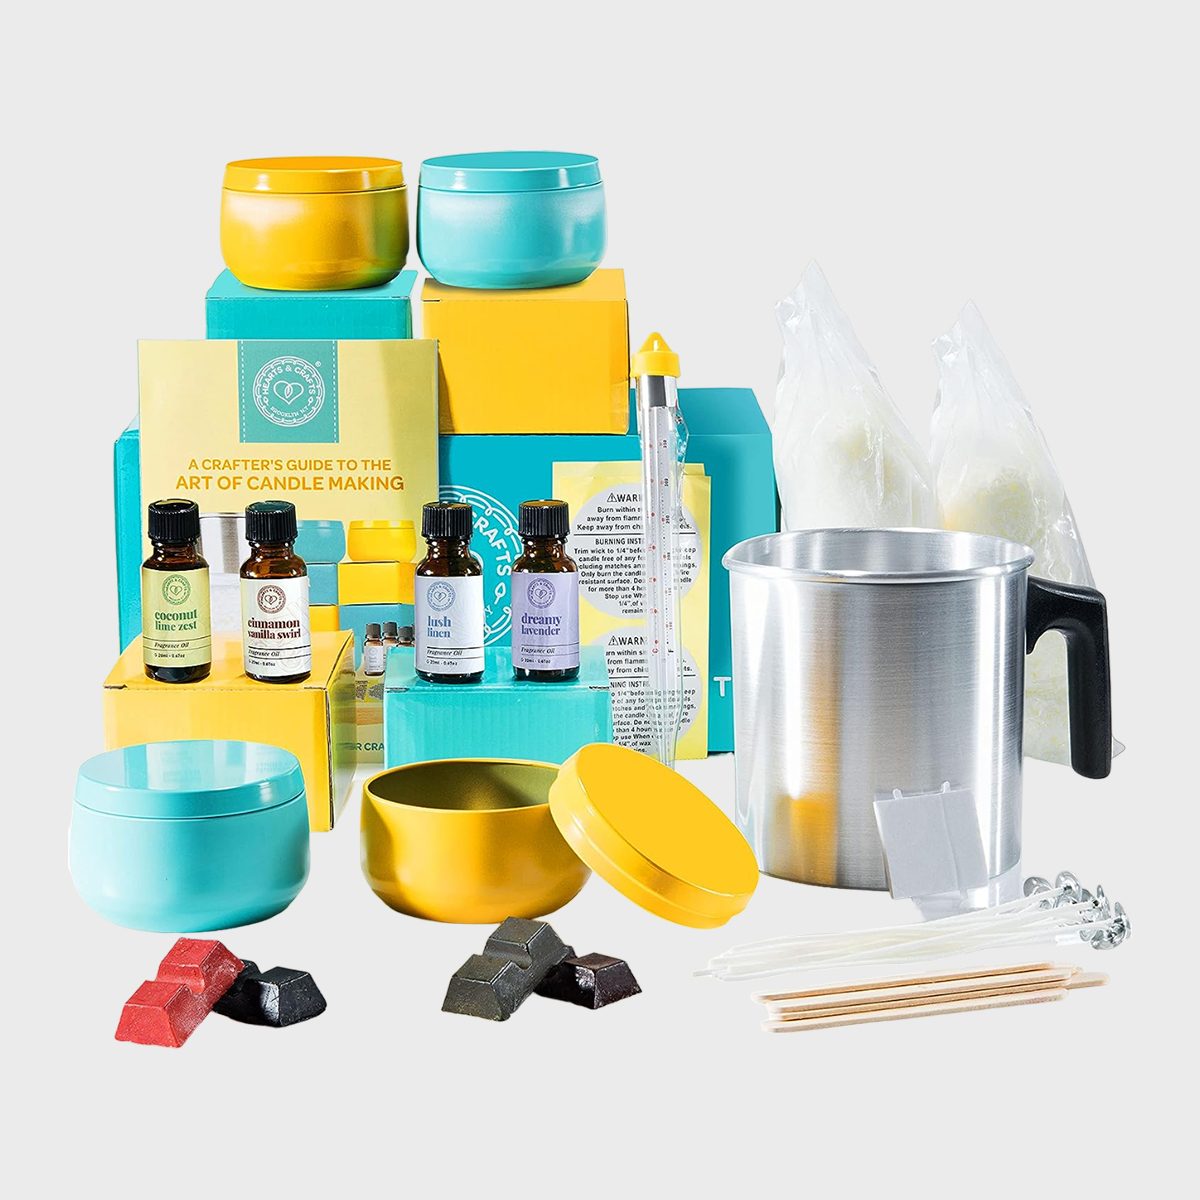 <p>Have an arts and crafts lover on your hands? She'll appreciate this <a href="https://www.amazon.com/dp/B08NFGNQ9Z" rel="noopener noreferrer">DIY candle making kit</a> which comes with everything she needs to create <a href="https://www.rd.com/list/personalized-gifts/" rel="noopener noreferrer">personalized gifts</a> for her nearest and dearest. The large kit includes two pounds of all-natural soy wax flakes, 10 pre-waxed wicks, four wick glue dots, four fragrance oils, a wax pouring pitcher, stirring sticks, wooden centering devices, candle dye blocks, four candle tins with gift boxes, caution stickers, a thermometer and a how-to guide.</p> <p class="listicle-page__cta-button-shop"><a class="shop-btn" href="https://www.amazon.com/dp/B08NFGNQ9Z?th=1">Shop Now</a></p>